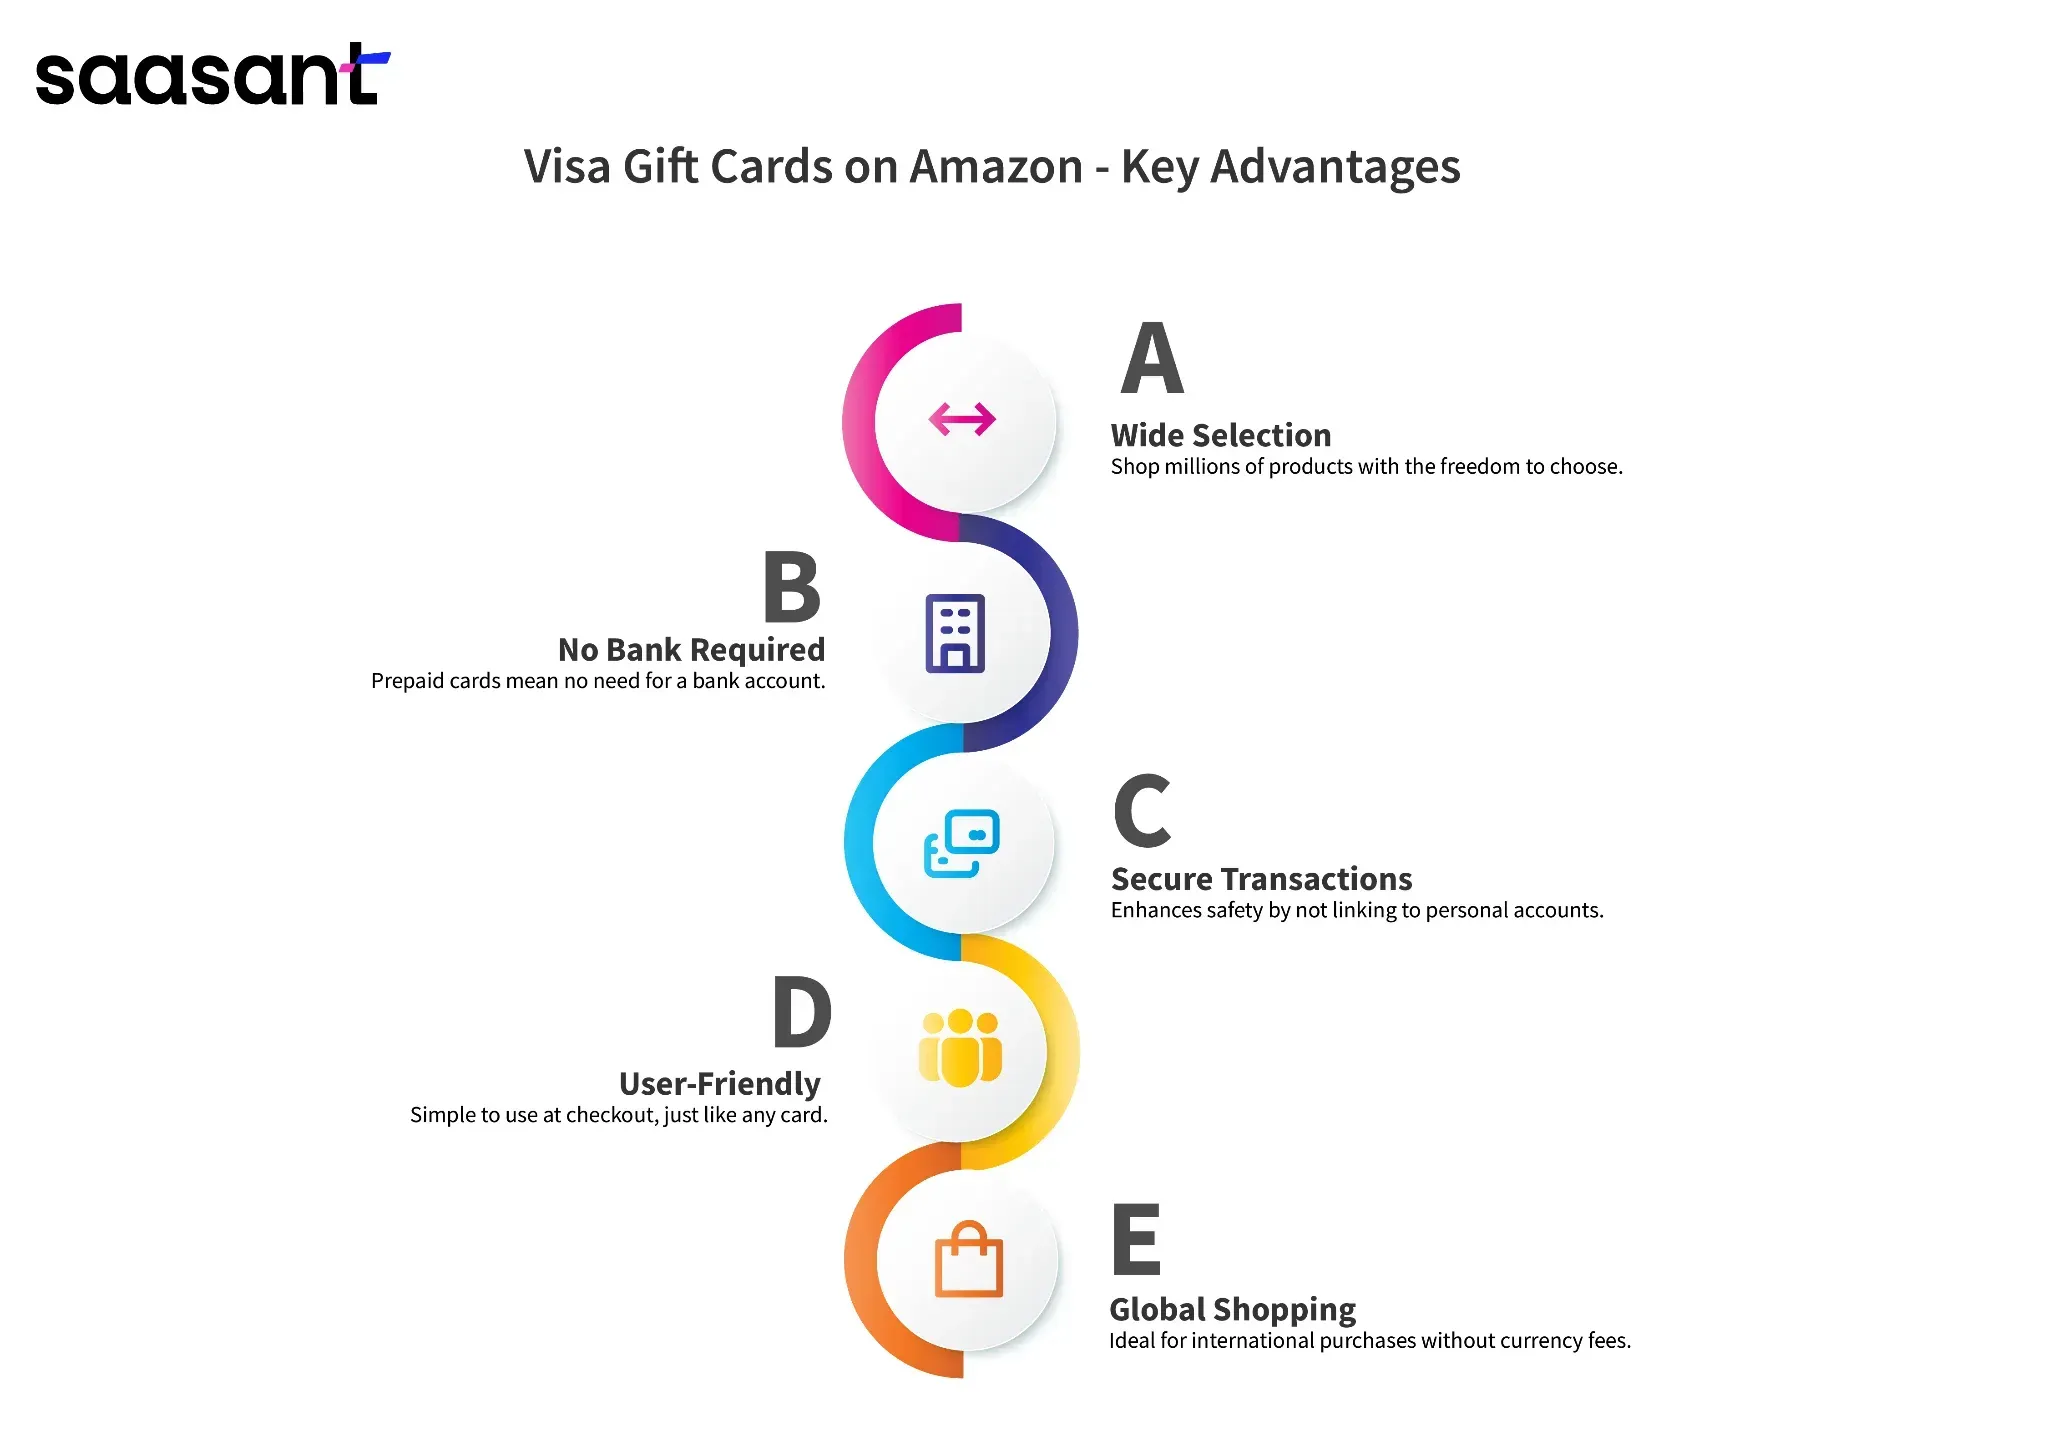 Advantages of using VISA Gift Cards on Amazon